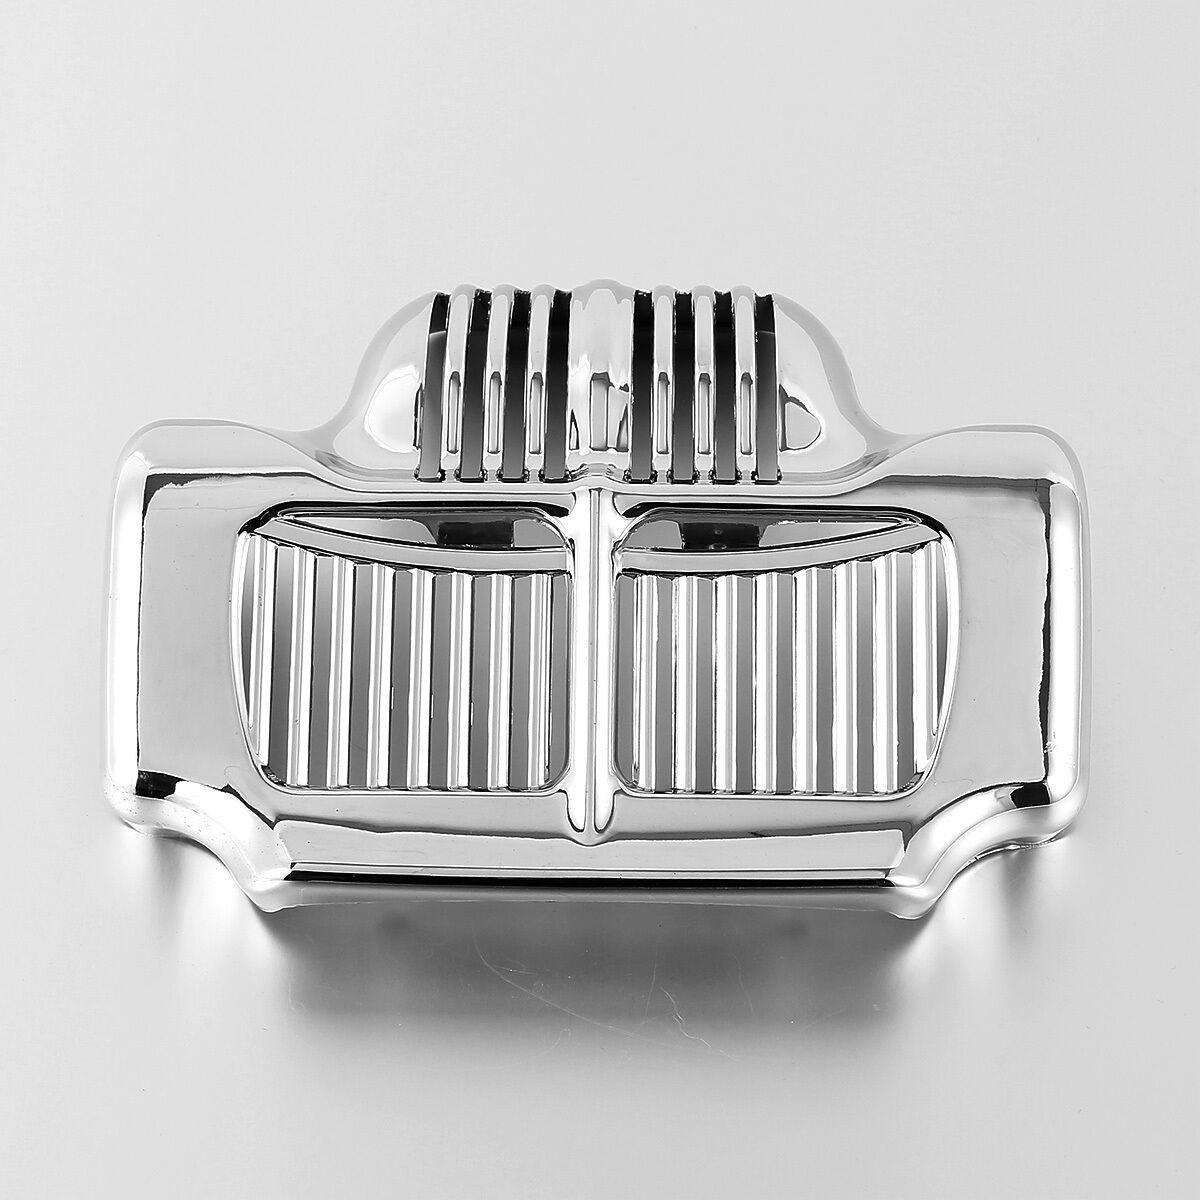 Chrome Oil Cooler Cover Fit For Harley Touring Road King Road Glide 2011-2016 15 - Moto Life Products